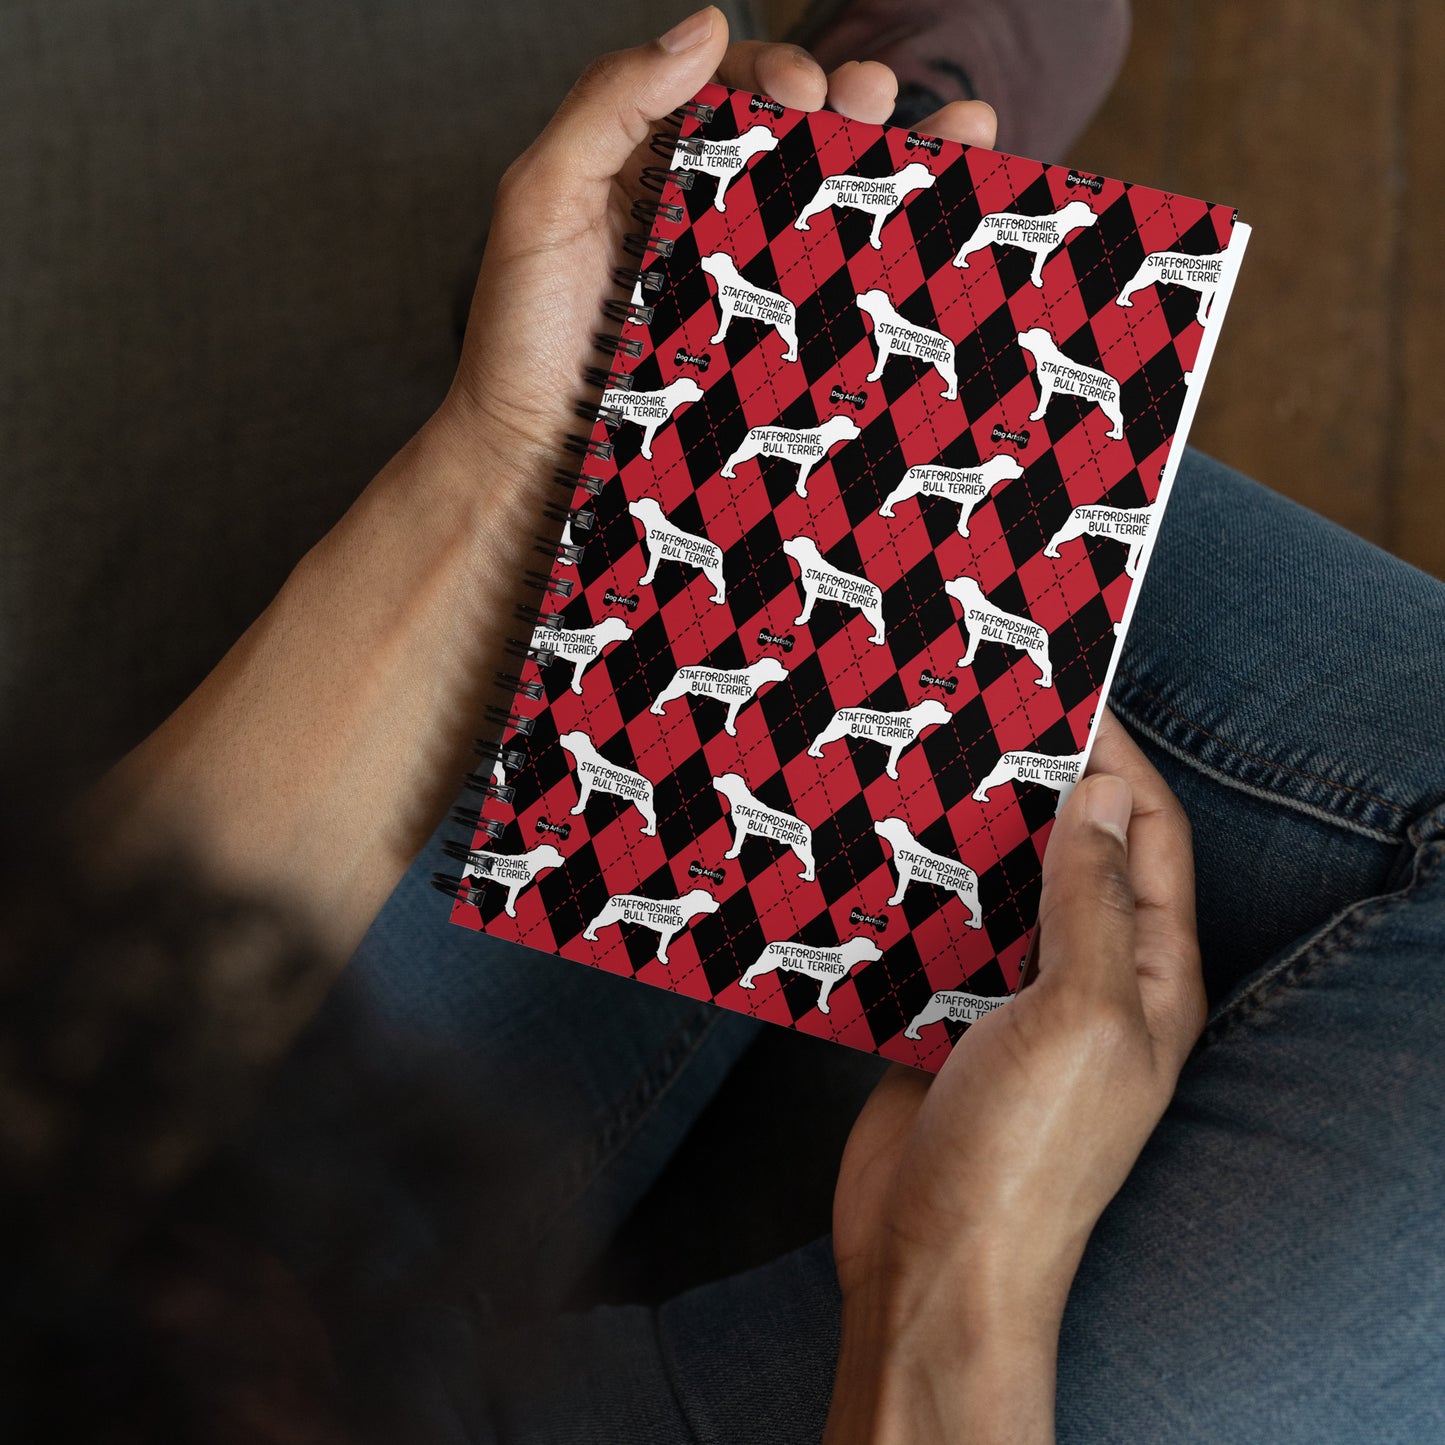 Staffordshire Bull Terrier Argyle Red and Black Spiral Notebooks